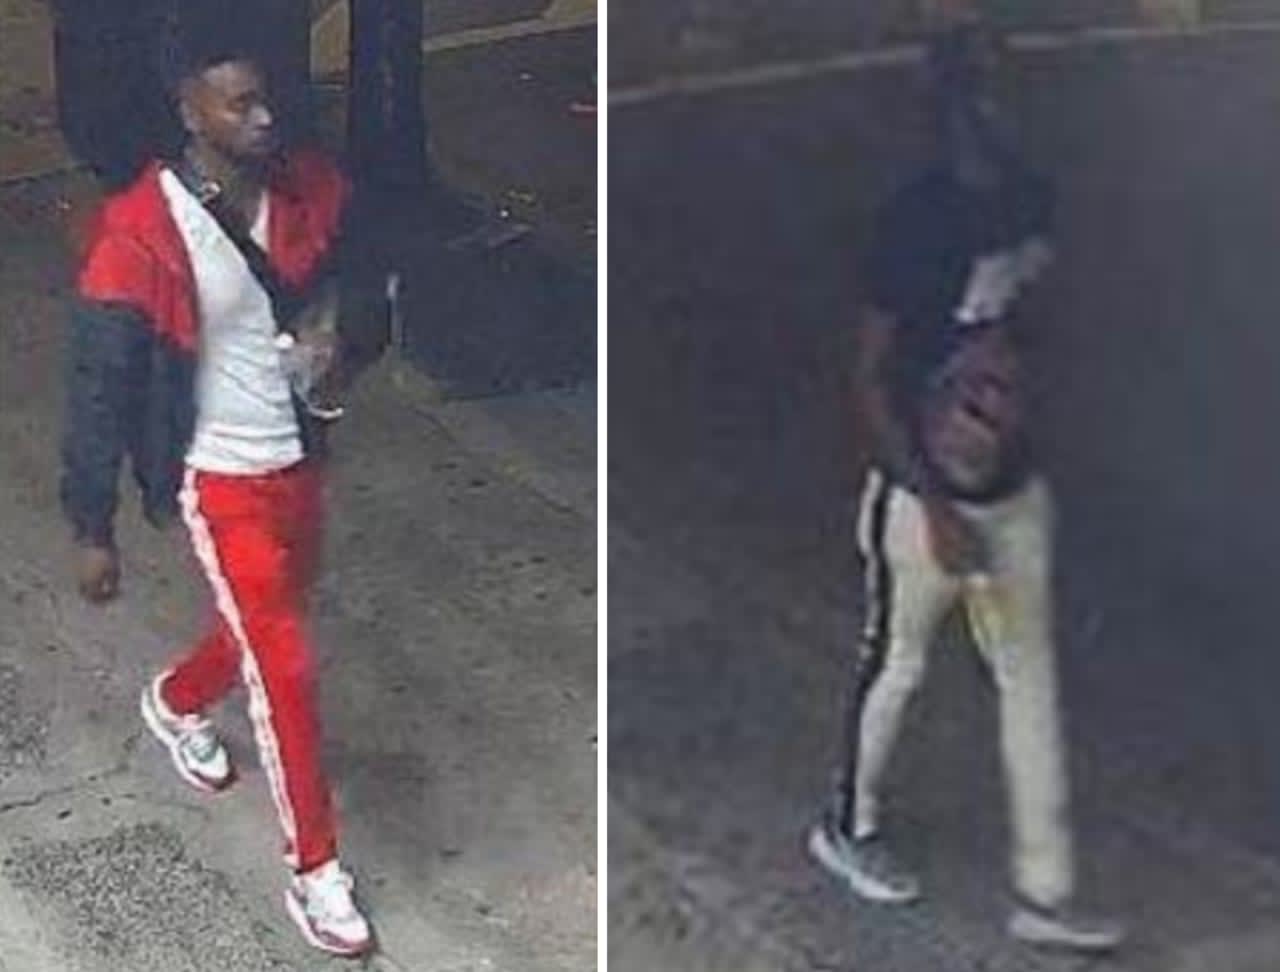 Police are seeking the public’s help identifying two men in connection with an armed carjacking that occurred in Newark before dawn Tuesday.